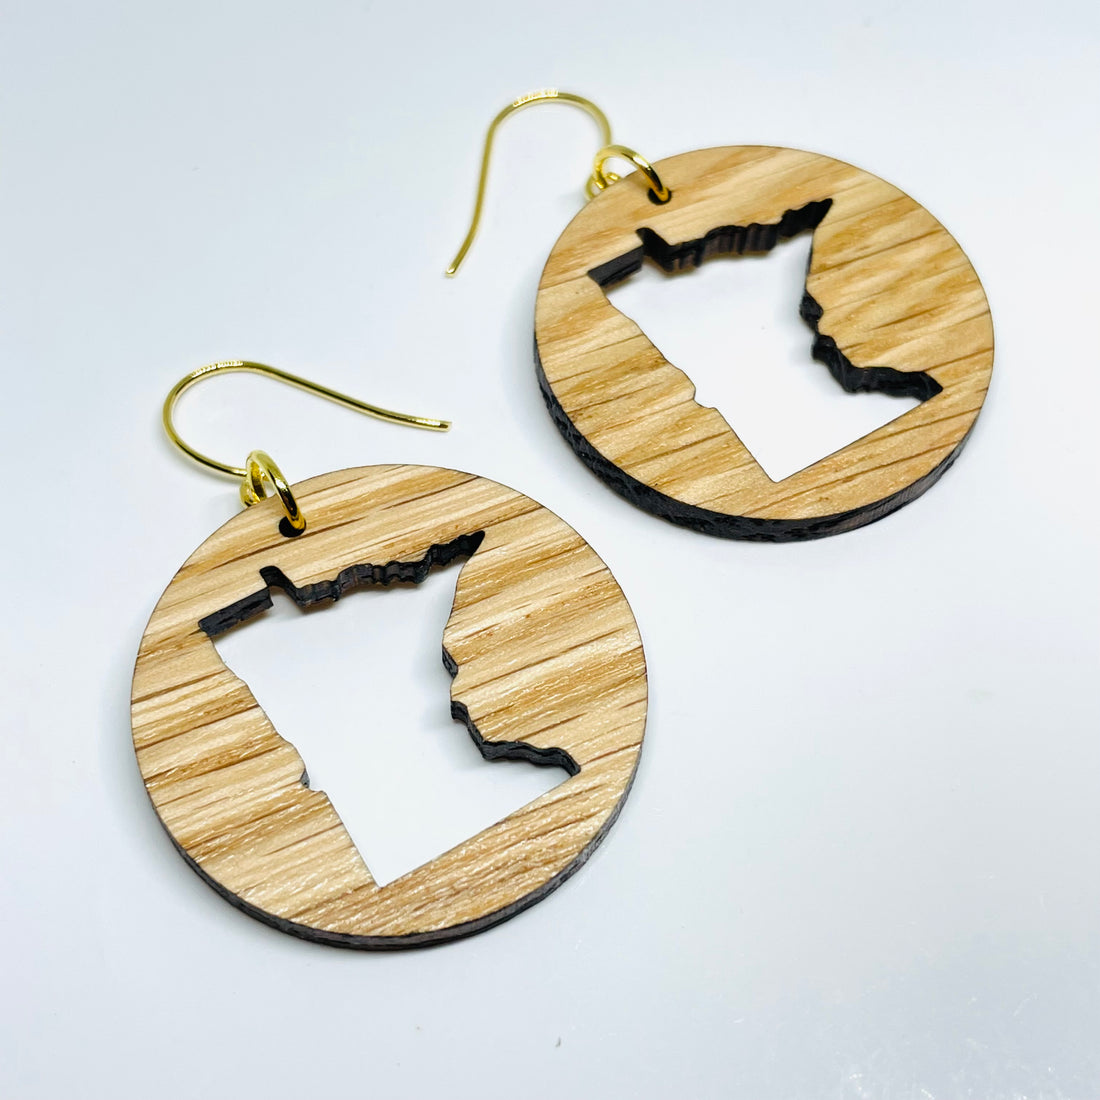 Minnesota local wood and resin artist. laser cut red oak wood, nickel free dangle earrings circle shaped with MN State cutout.